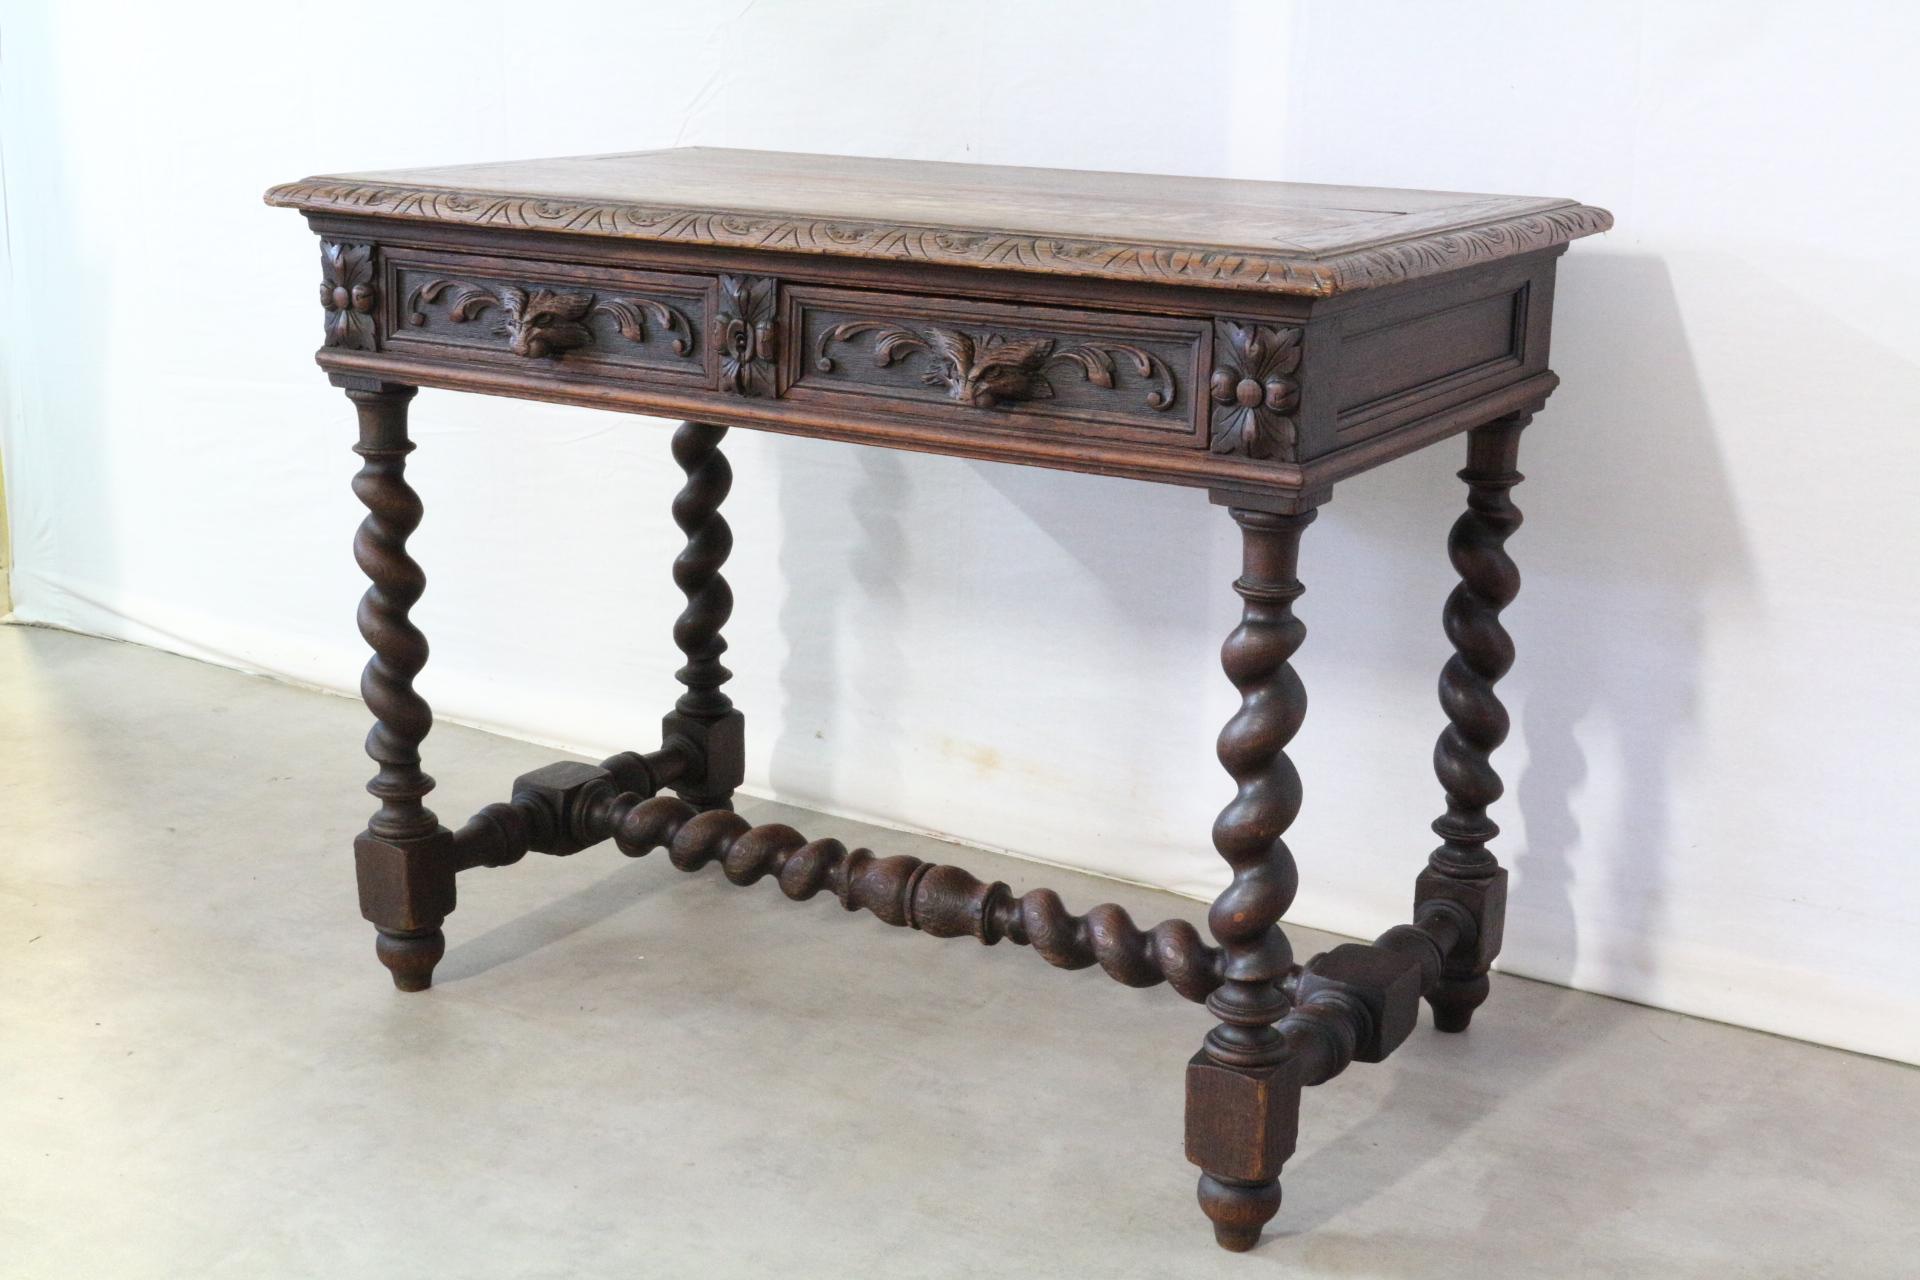 Writing table or desk Henri II 19th century with lion masque drawer handles
Barley twist legs and cross bar
Carved edge top
Hand carved oak
Good antique condition with very good patina minor signs of use for its age
Charming.